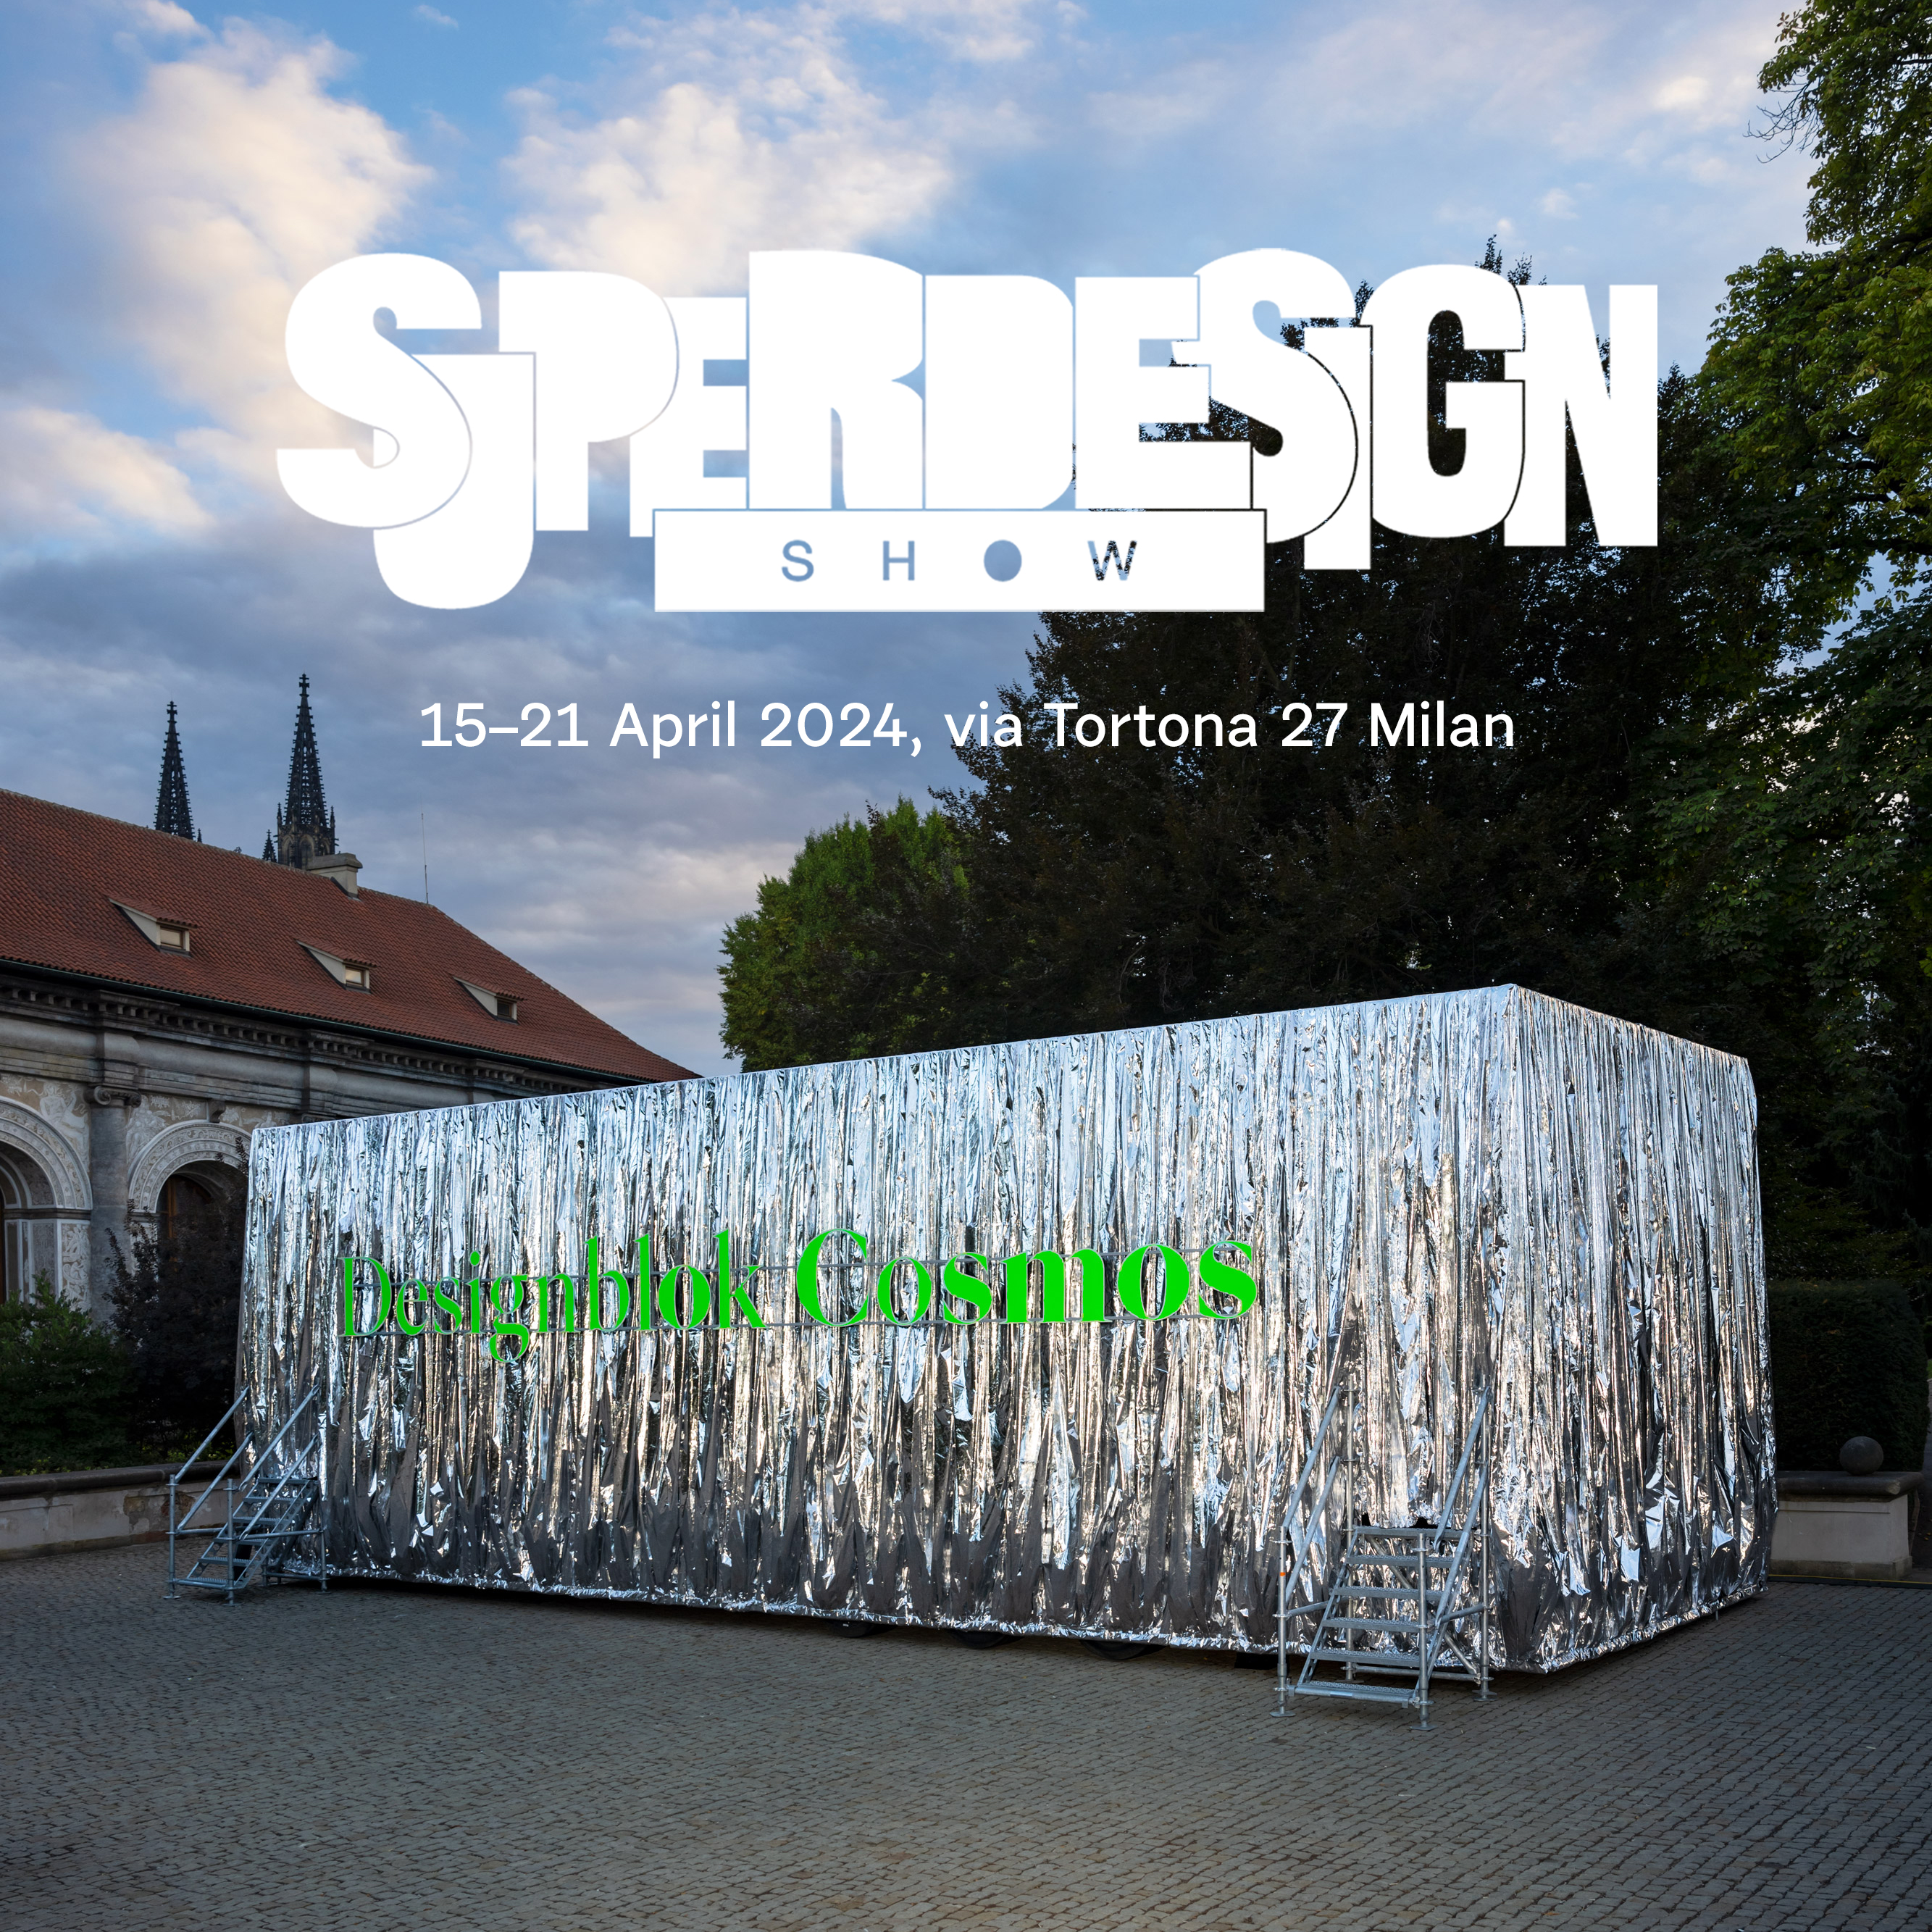  Designblok Cosmos is heading to Milan Design Week. The Intergalactic Beauty of Czech Design will park at Superdesign Show 